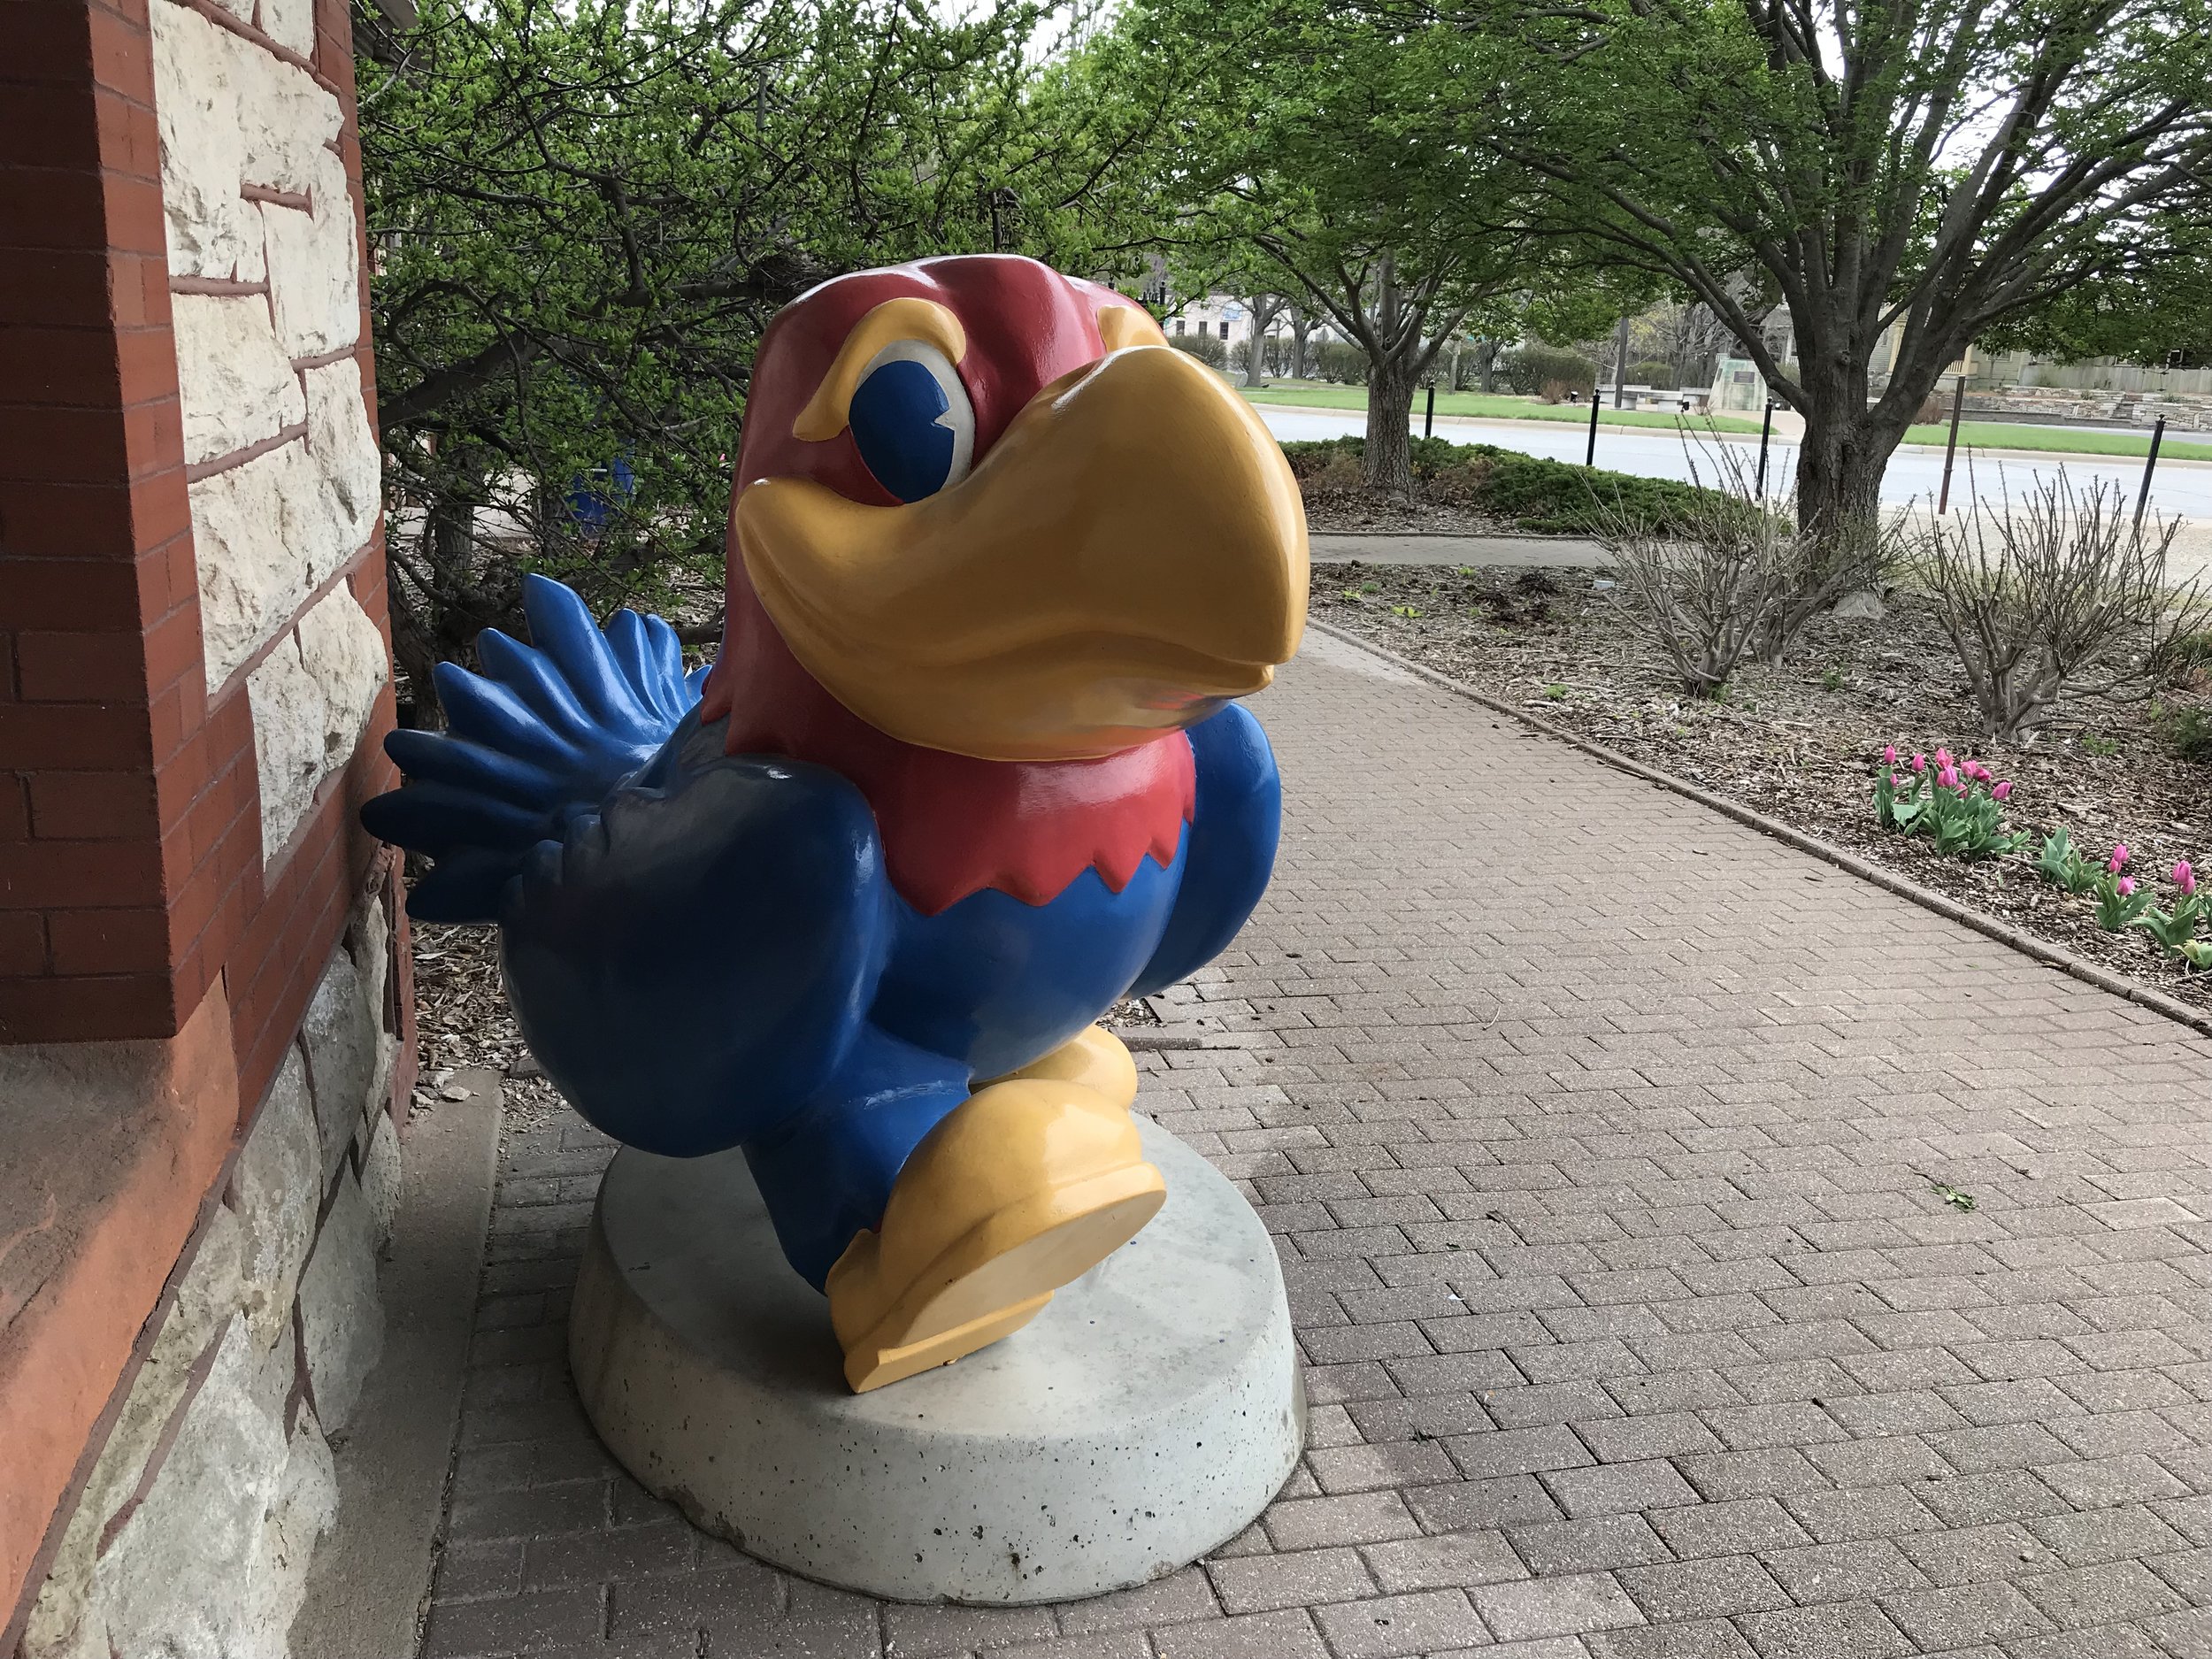  The University of Kansas Jayhawk is descended from the Jayhawkers who fought for the Free State of Kansas. 